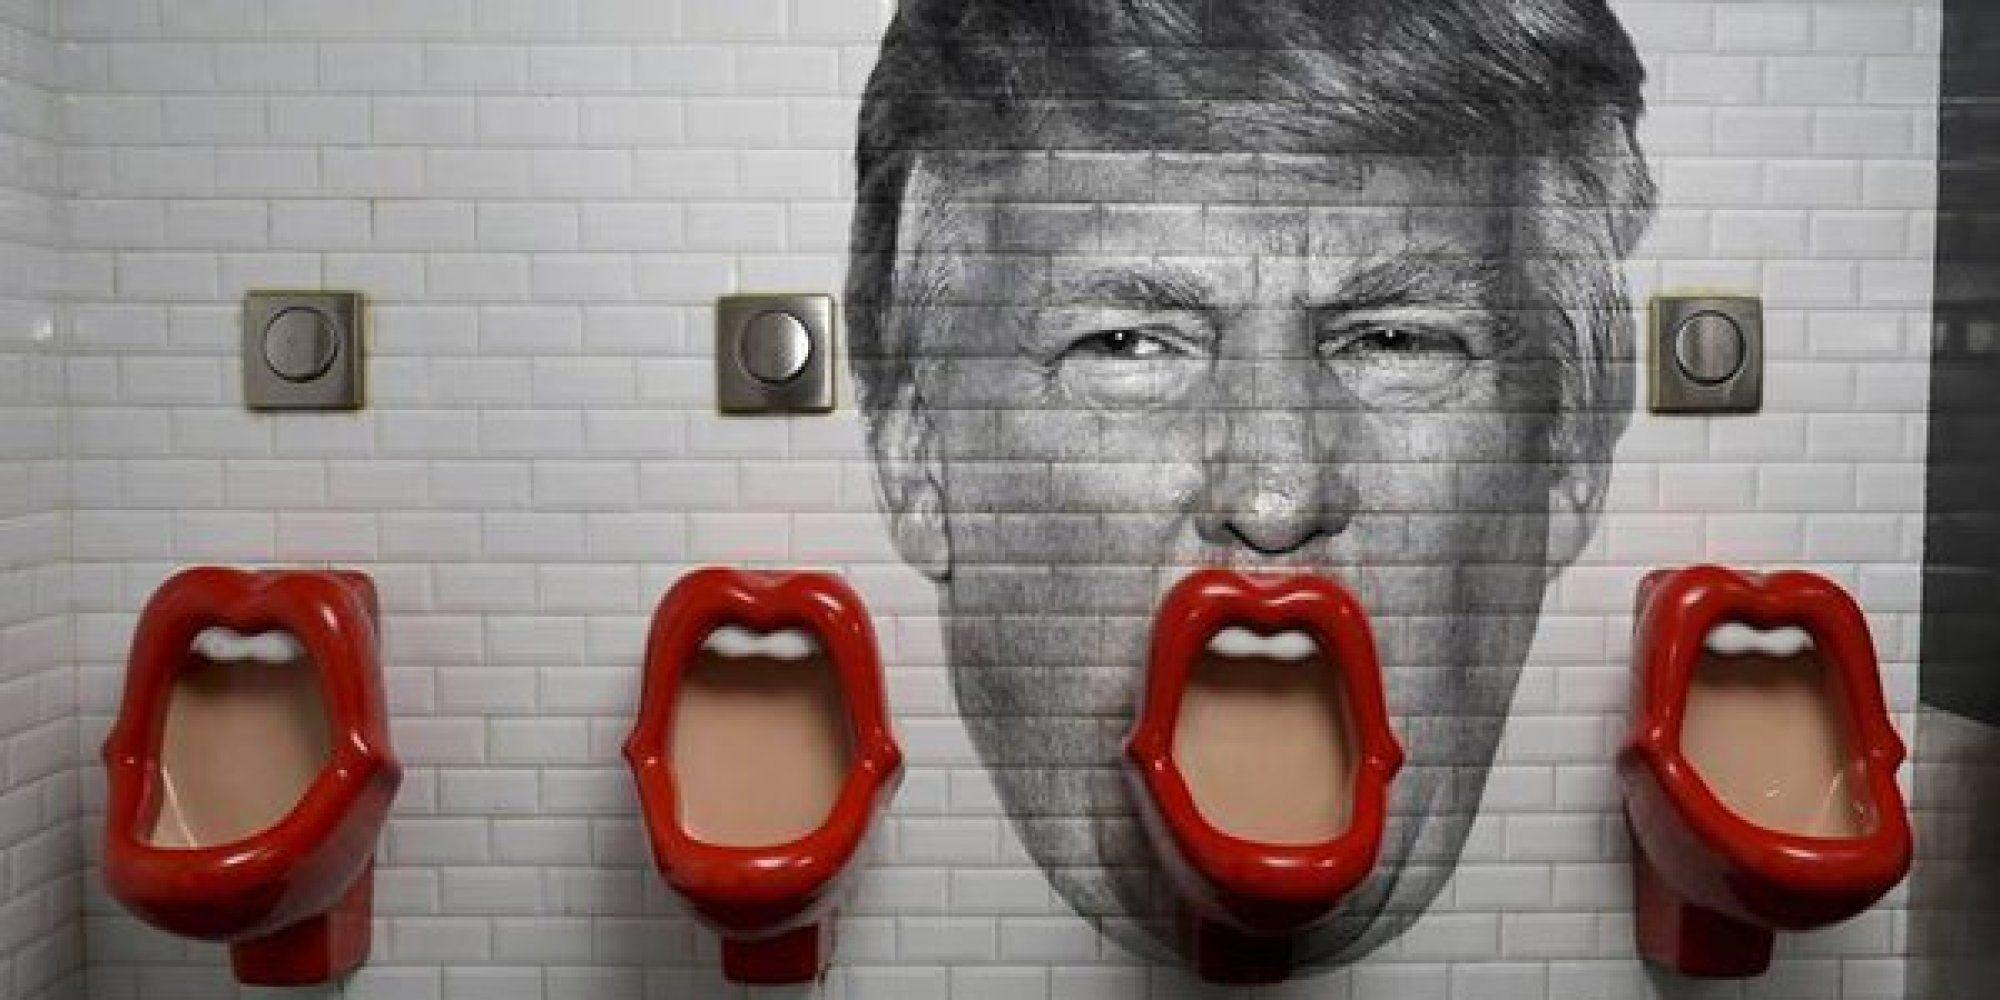 Made to lick urinals stories